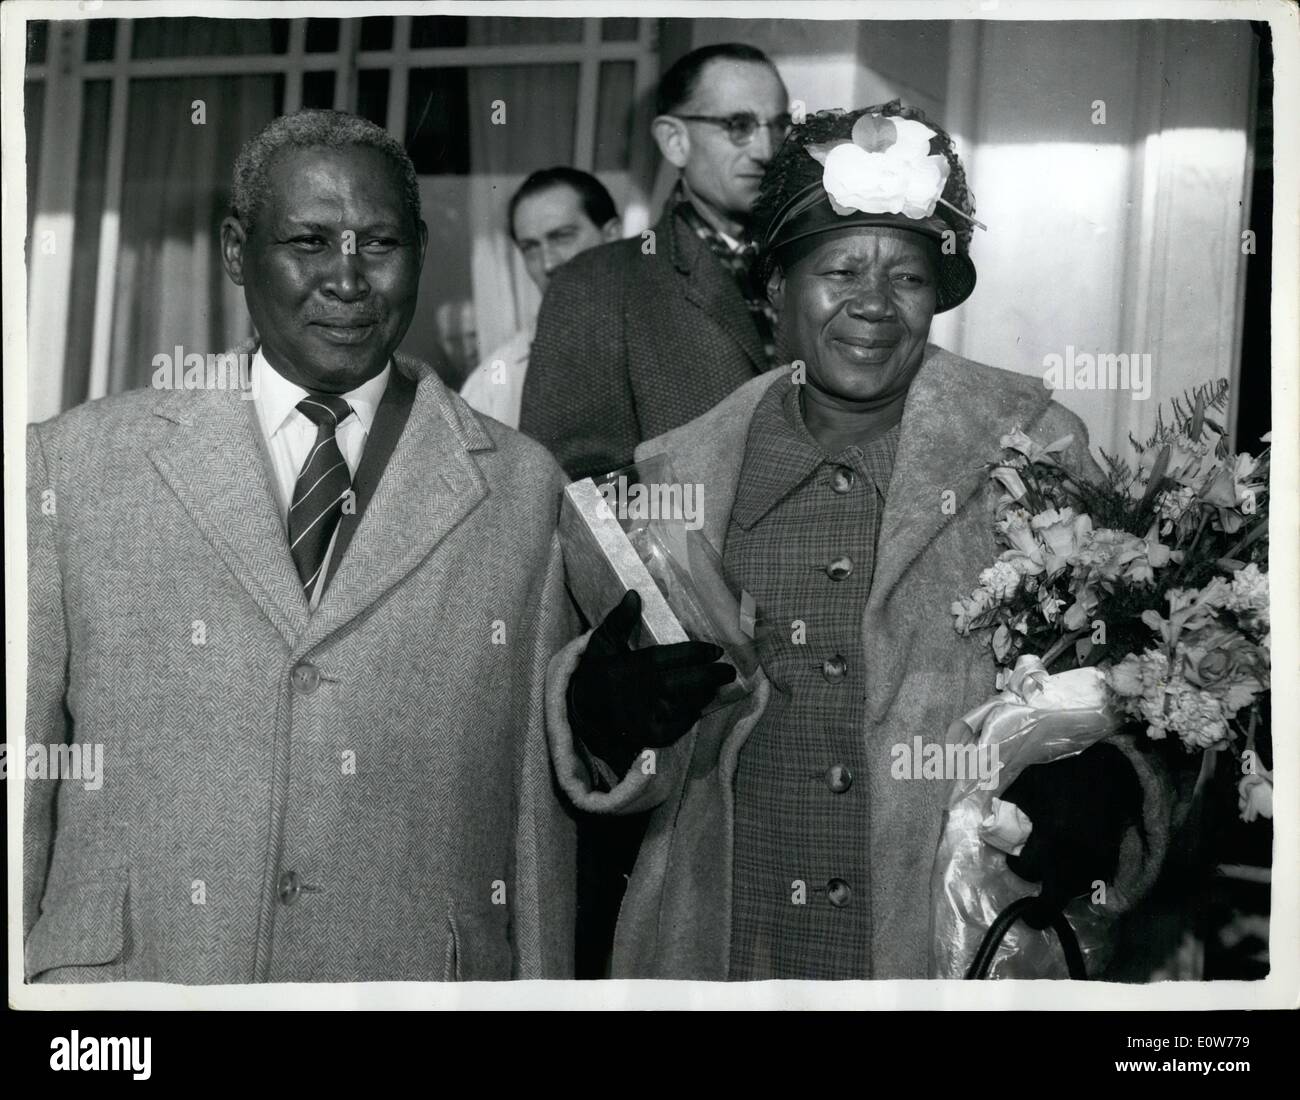 Dec. 12, 1961 - Zulu Chief who Won Nobel Prize Passes Through London For Oslo - Zulu Chief Alebert Lutuli and His Wife, from South Africa, Passed through London on their way to OSLO Where he is to be Presented with the Nobel Peace Prize - Photo Shows: Chief and Mrs Lutuli leaving the Dorchester Hotel in London this Morning for the Airport Stock Photo